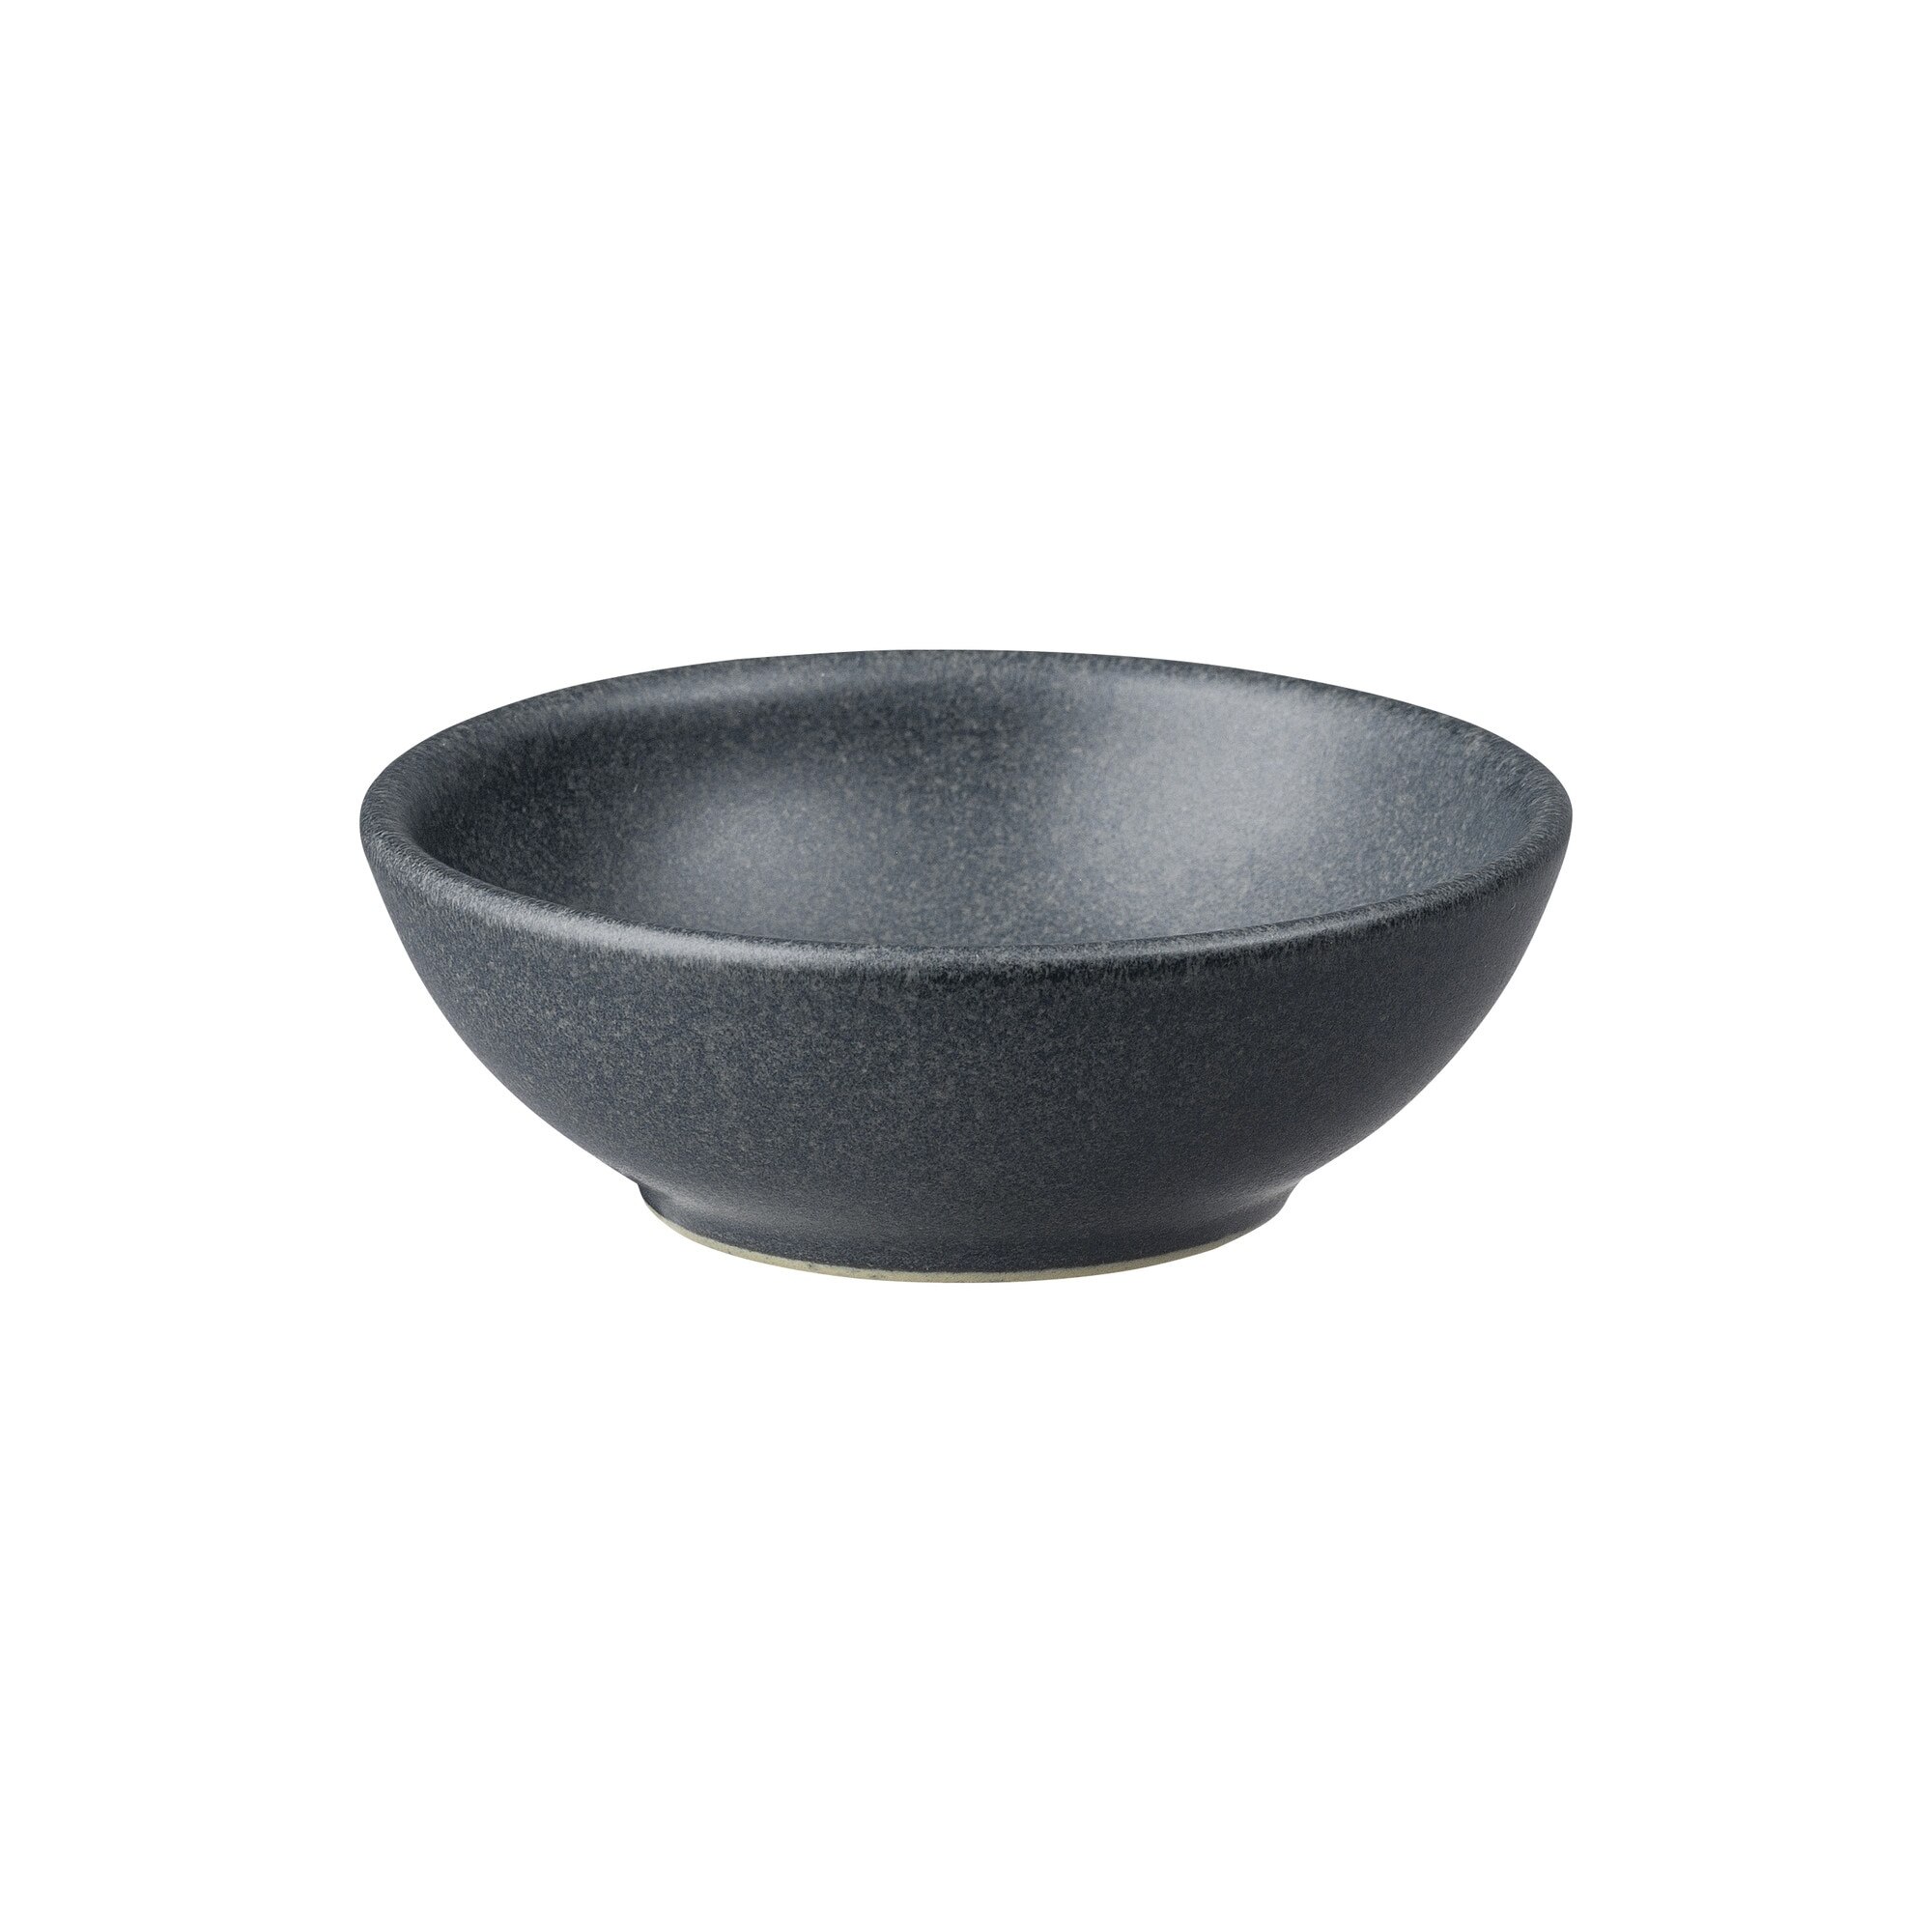 Impression Charcoal Extra Small Round Dish